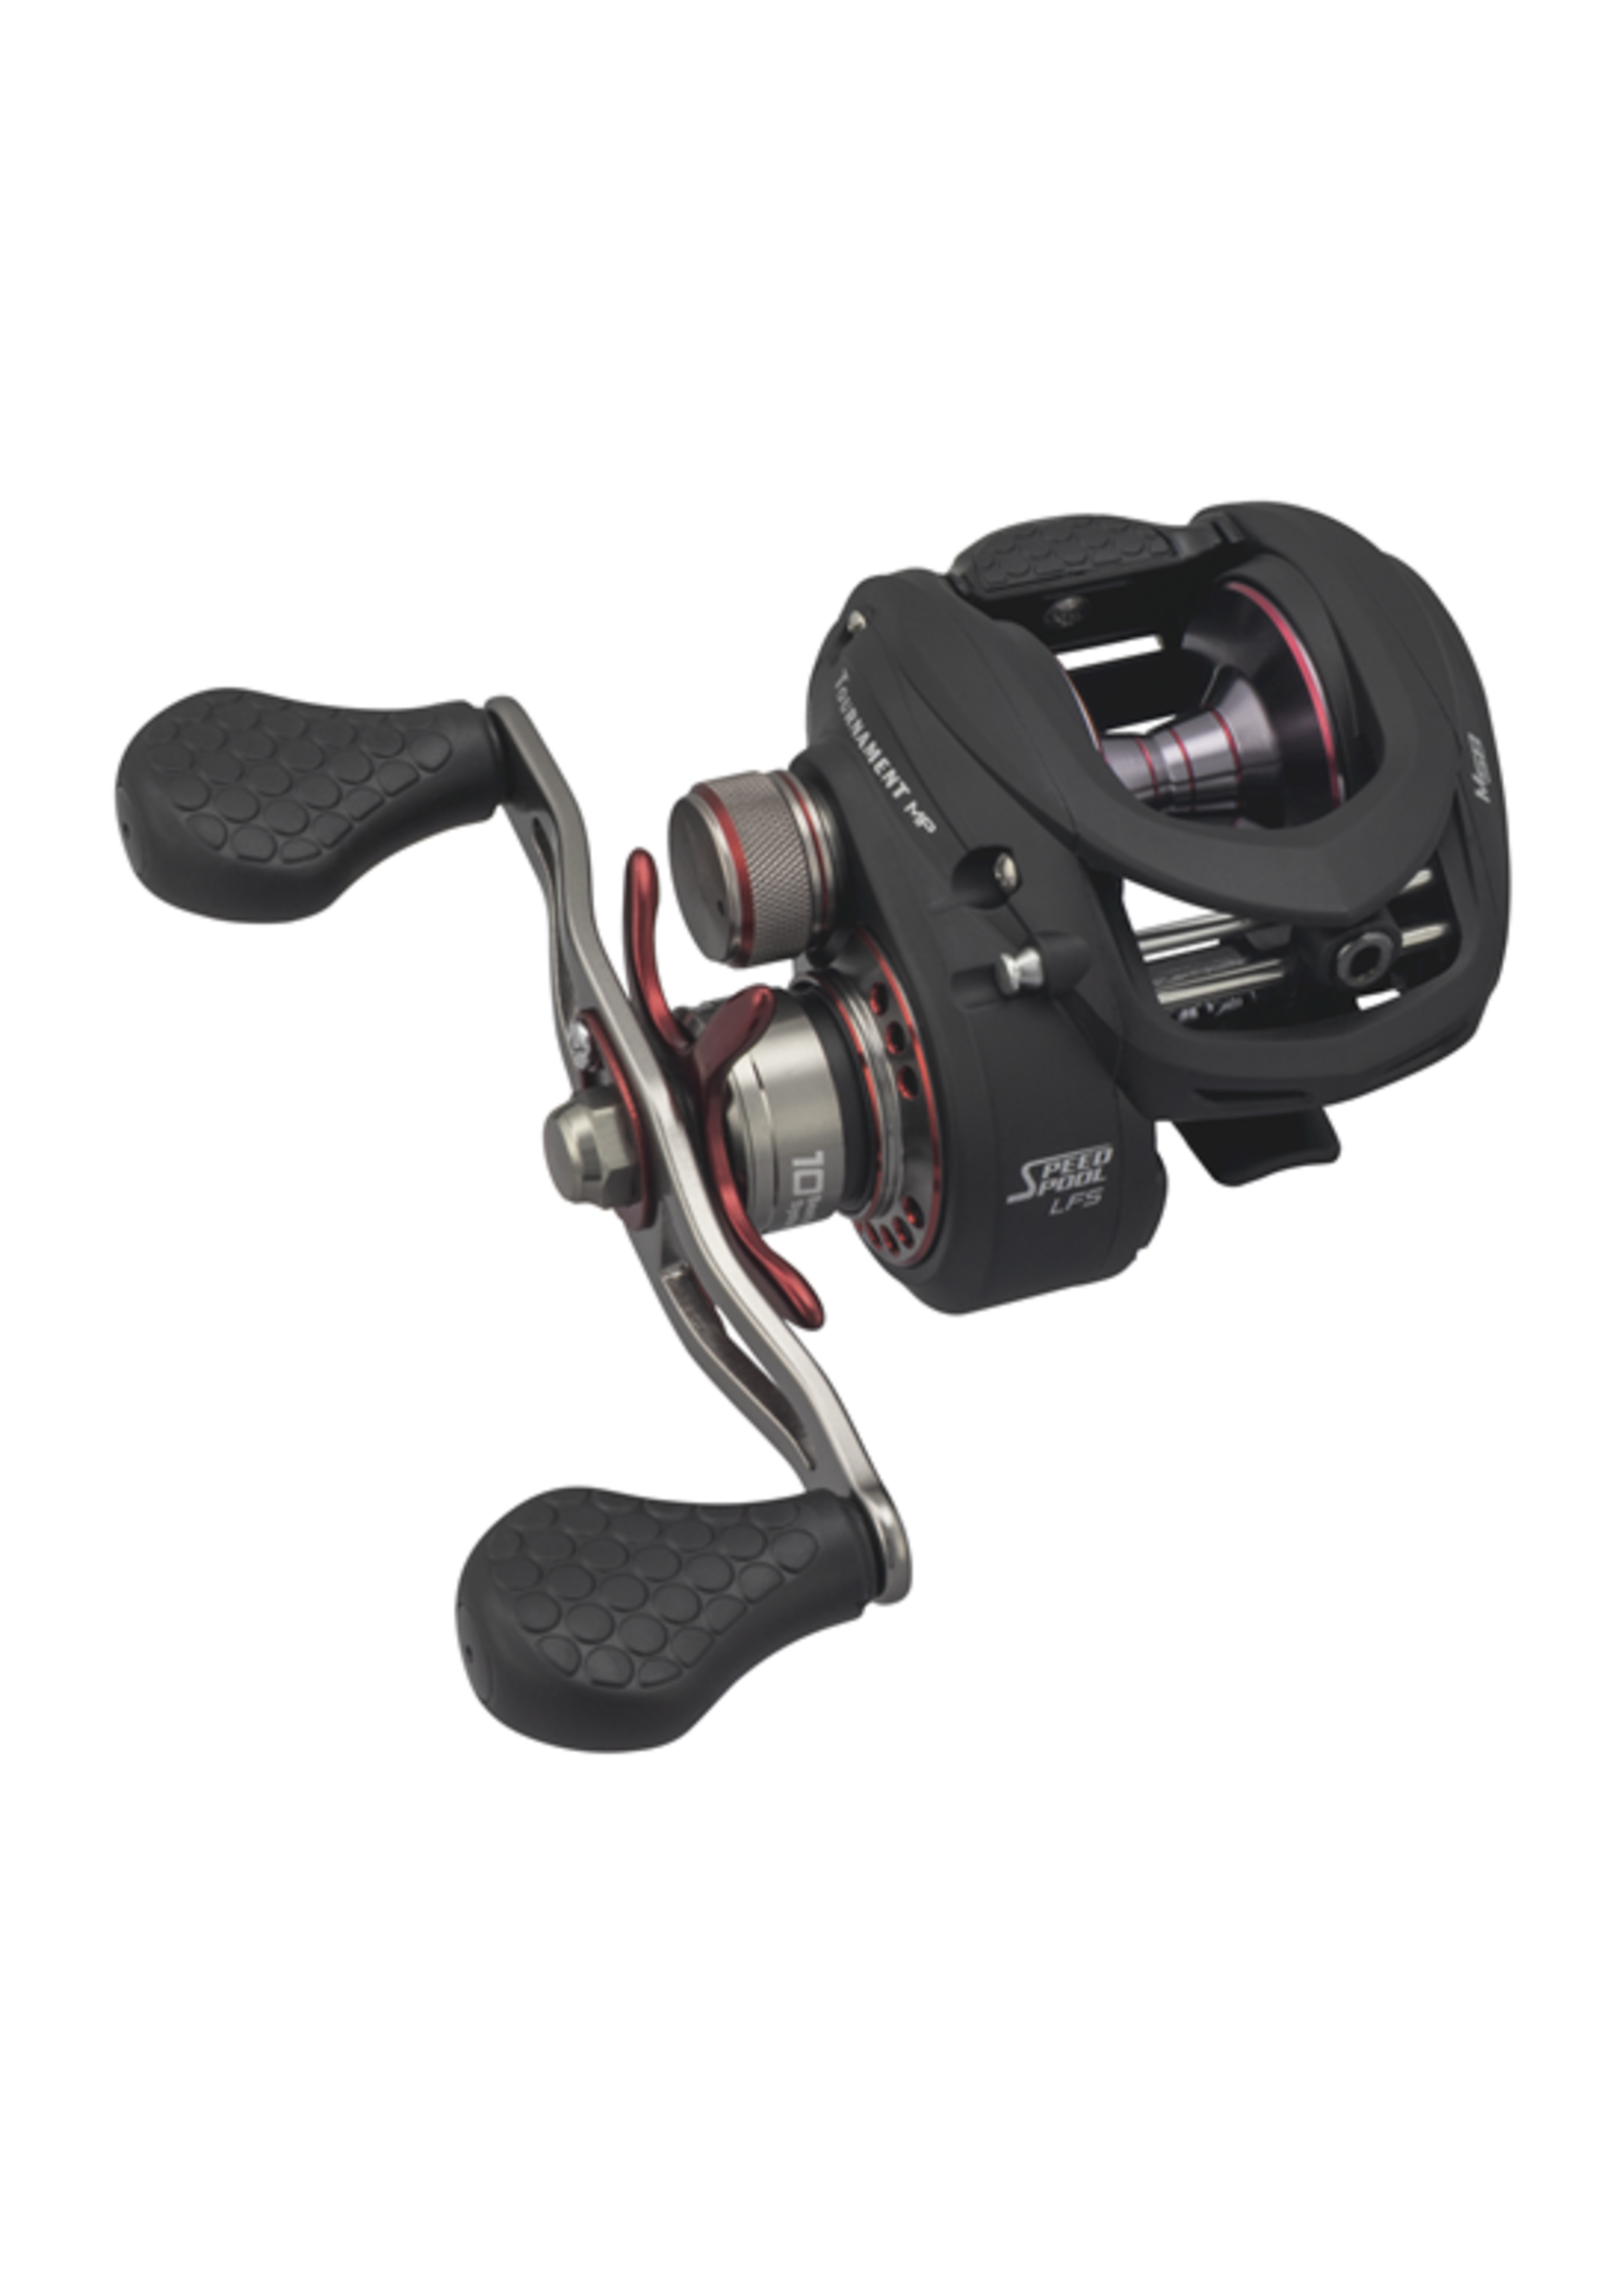 LEW'S LEW'S TOURNAMENT MP SPEED SPOOL LFS BAITCAST REEL 5.6:1 - Rugged  Shoal Outfitters